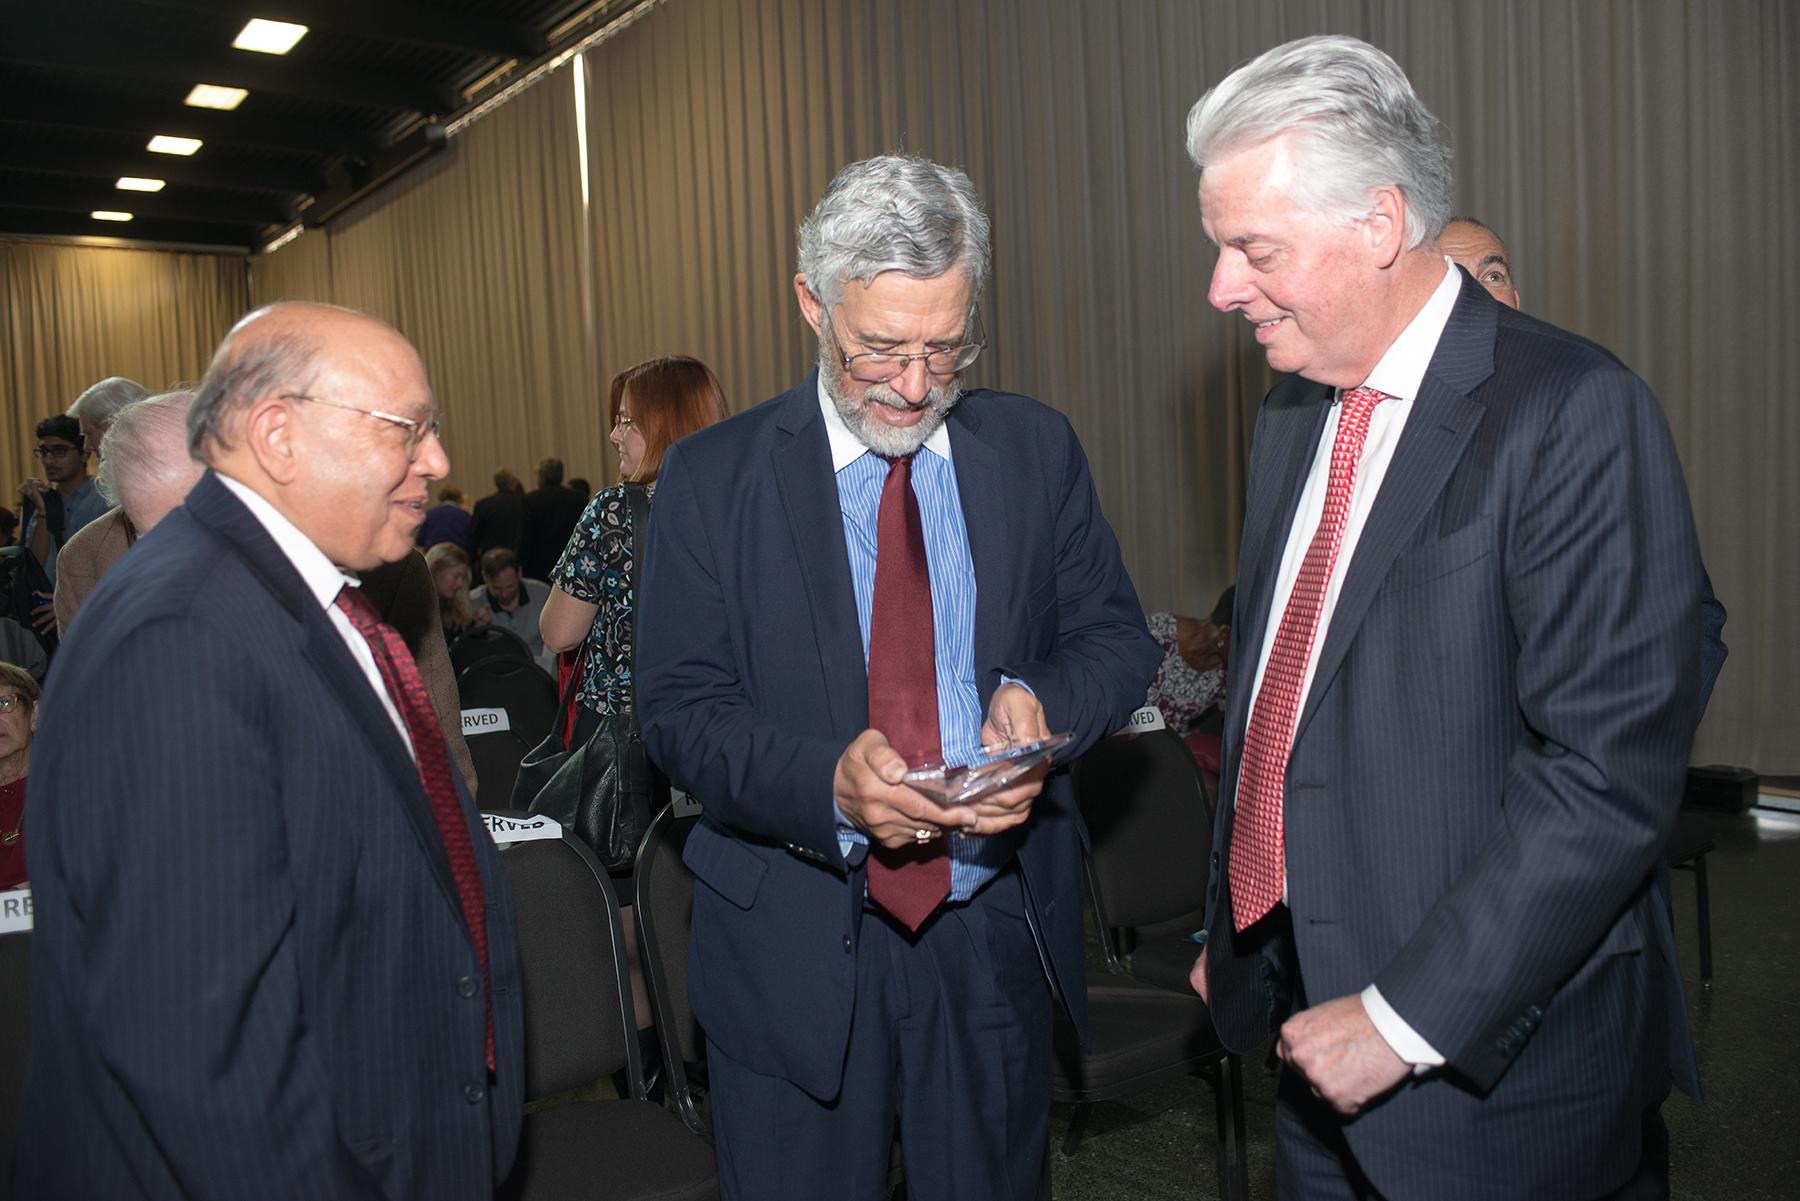 John P. Holdren, center, receives an award Oct. 19 from Illinois Institute of Technology Vice President for International Affairs Darsh Wasan, left, and IIT President Alan Cramb, right. (Bonnie Robinson / Illinois Institute of Technology)